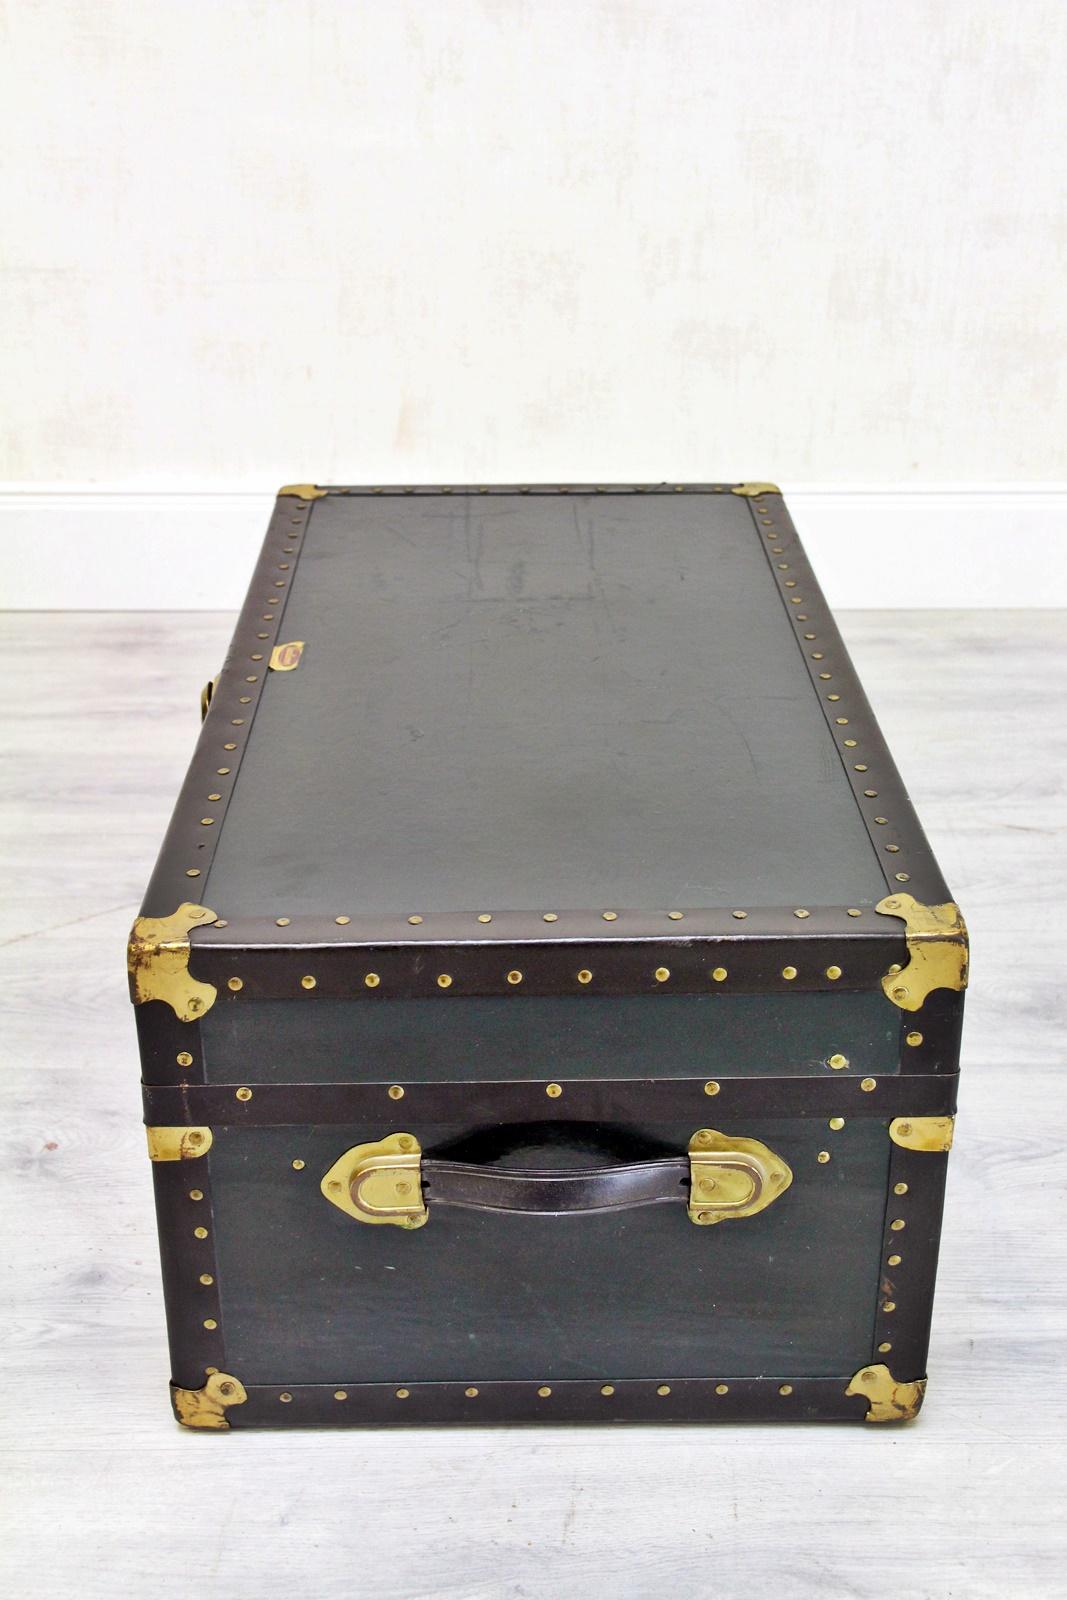 Old Suitcase Stool Antique Chair Coffee Table Overseas Case Vintage In Good Condition For Sale In Lage, DE